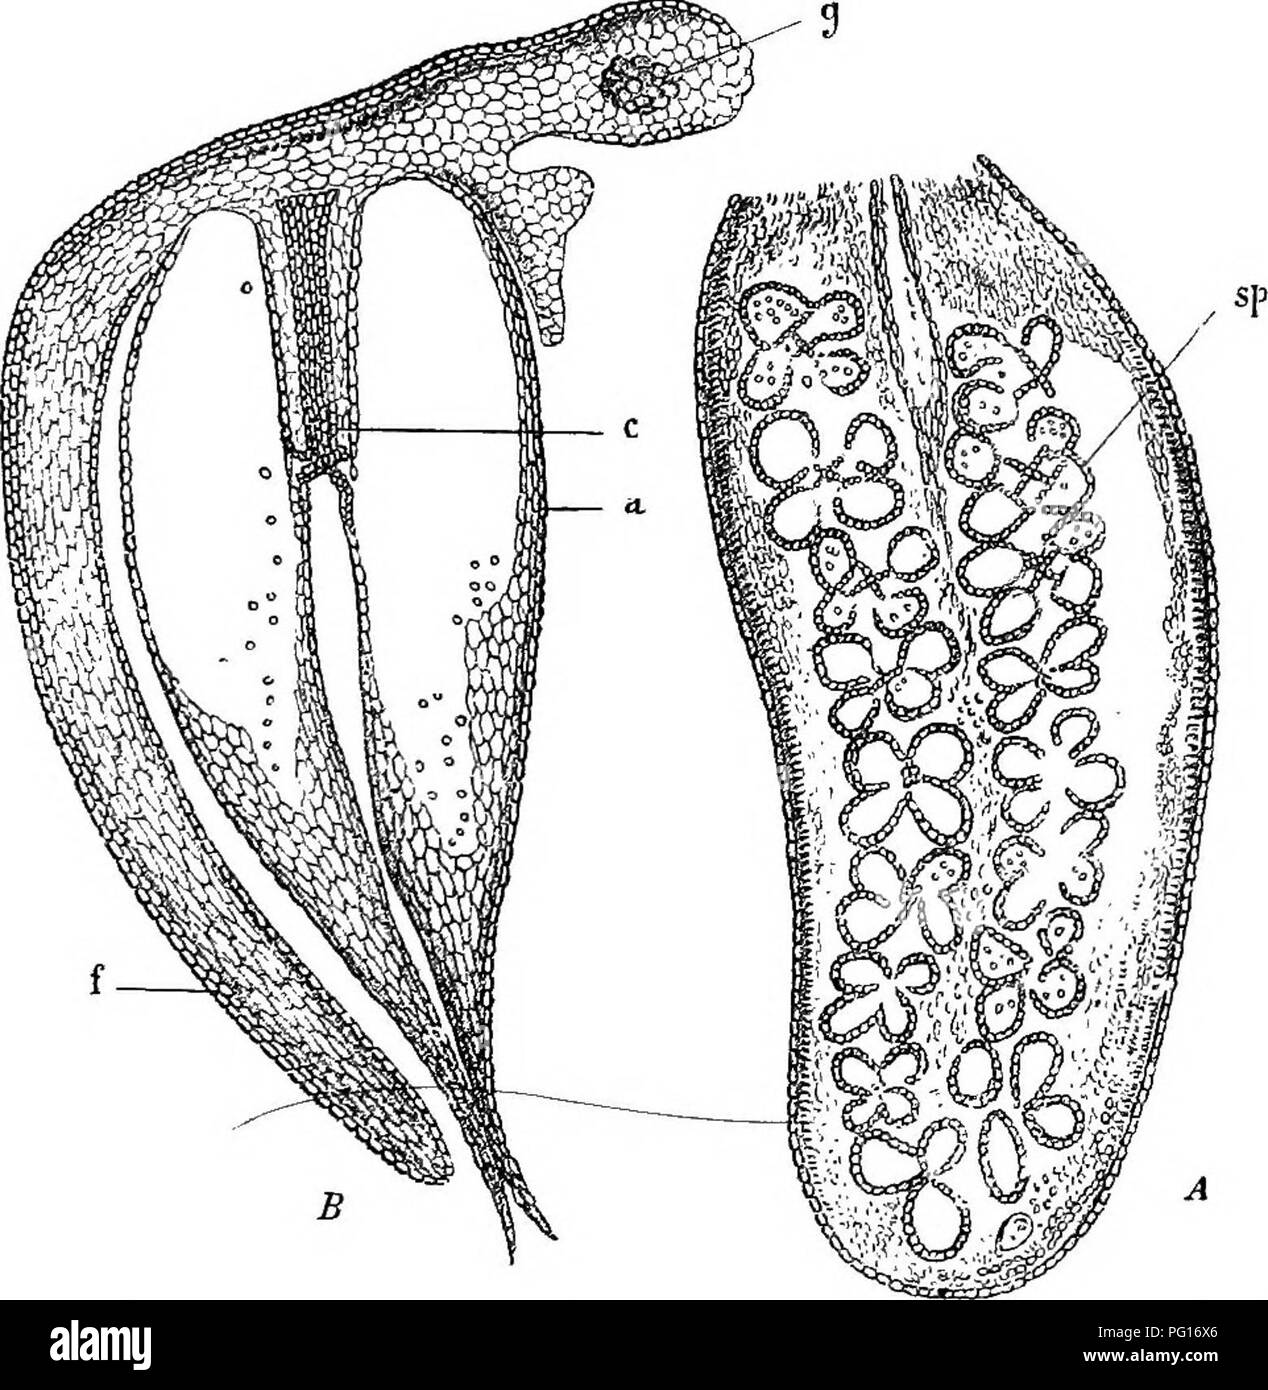 . Studies in fossil botany . Paleobotany. FERNSâFRUCTIFICATIONS 283 and with the central receptacle; higher up they become free, and dehiscence appears to have taken place on the inner side, where the sporangial wall was thinnest. Strasburger's remarks on the affinities of. Fig. no.âScolecopteris polymorpha. A. Lower surface of a fertile pinnule, showing numerous quadrisporangiate synangia (sj&gt;). Note the cruciform receptacle at the centre of some of the synangia. X about 8. B. Transverse section of half a pinnule, passing through a synangium. Â£â , vascular bundle of pinnule; f, infolded m Stock Photo